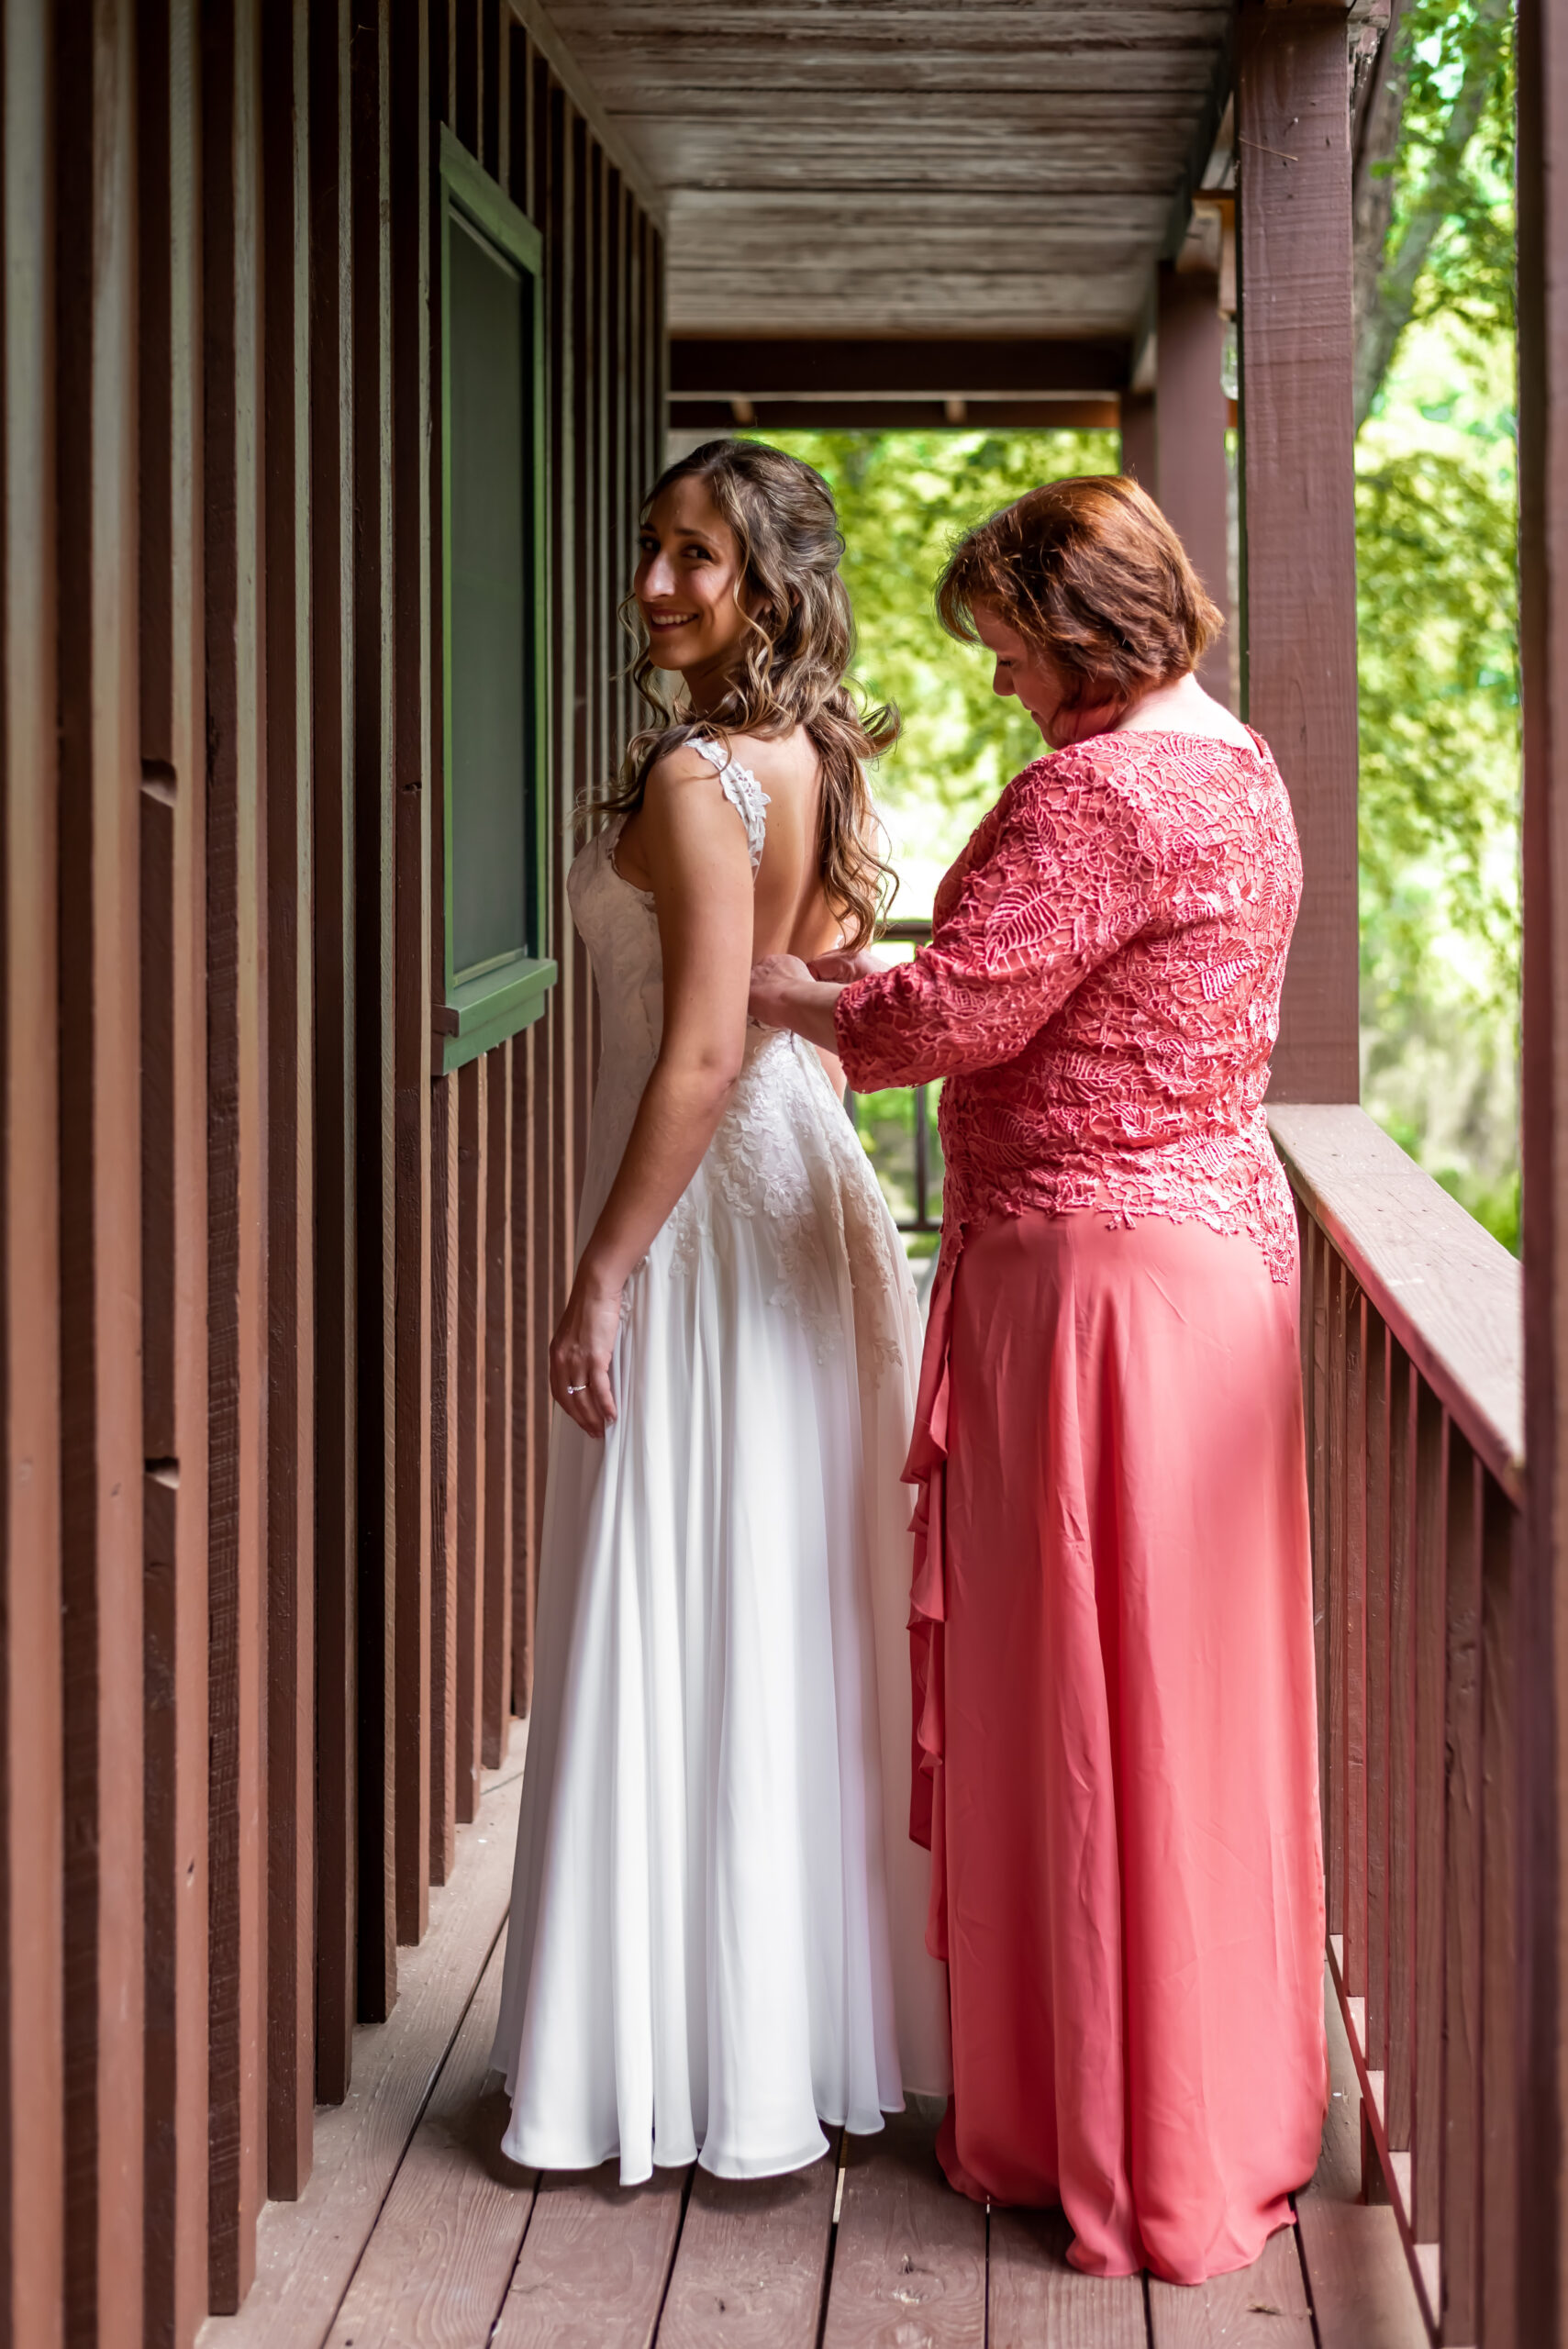 Mother of bride helps button her daughter's wedding dress